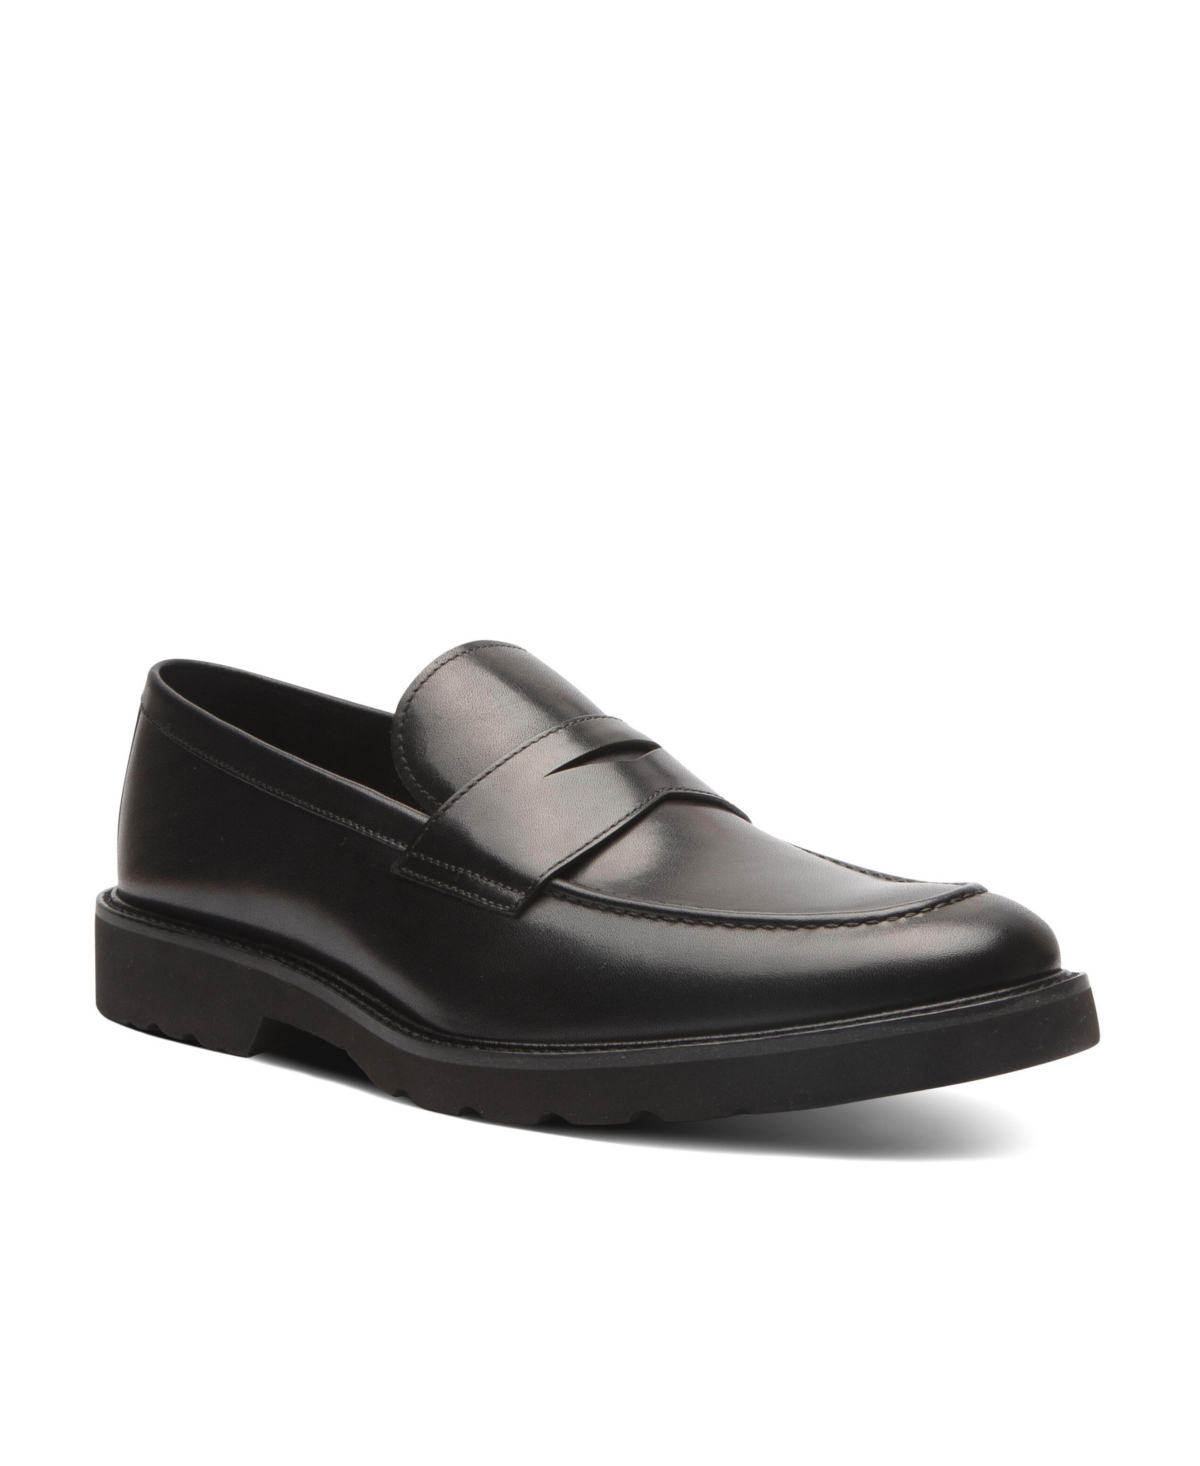 Men's Powell Penny Casual Slip-On Penny Loafer - Black